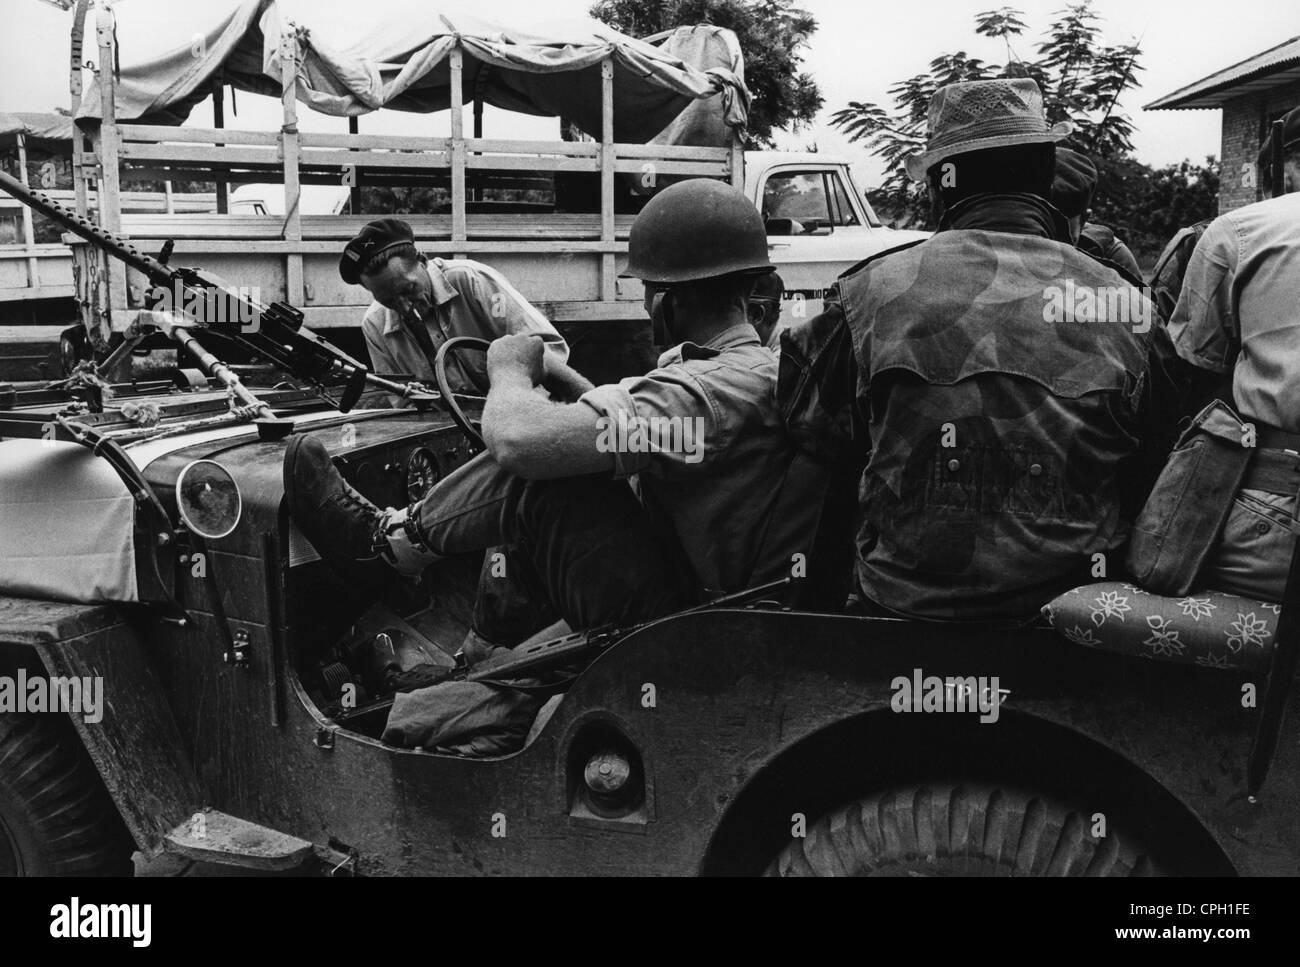 geography/travel, Congo, events, Simba uprising 1964 - 1965, mercenaries in a Jeep, Lisala, Equateur province, 6.10.1964, Democratic Republic of the Congo, Congo Crisis, Civil War, military, arms, Africa, 20th century, historic, historical, Willy's Jeep, 1960s, people, Additional-Rights-Clearences-Not Available Stock Photo